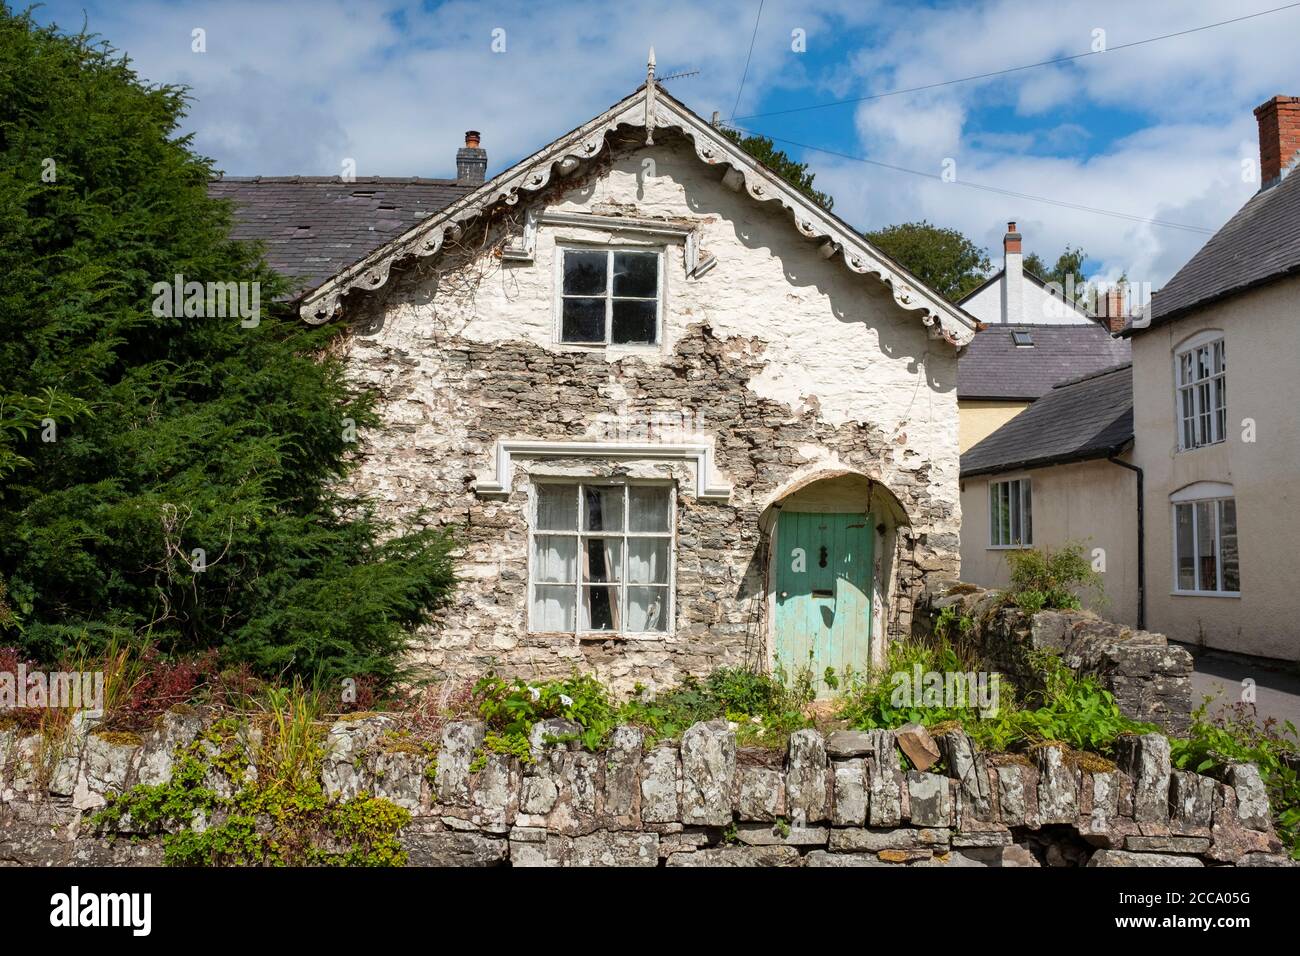 Abandoned cottage ripe for renovation in Clun, Shropshire, England, UK Stock Photo